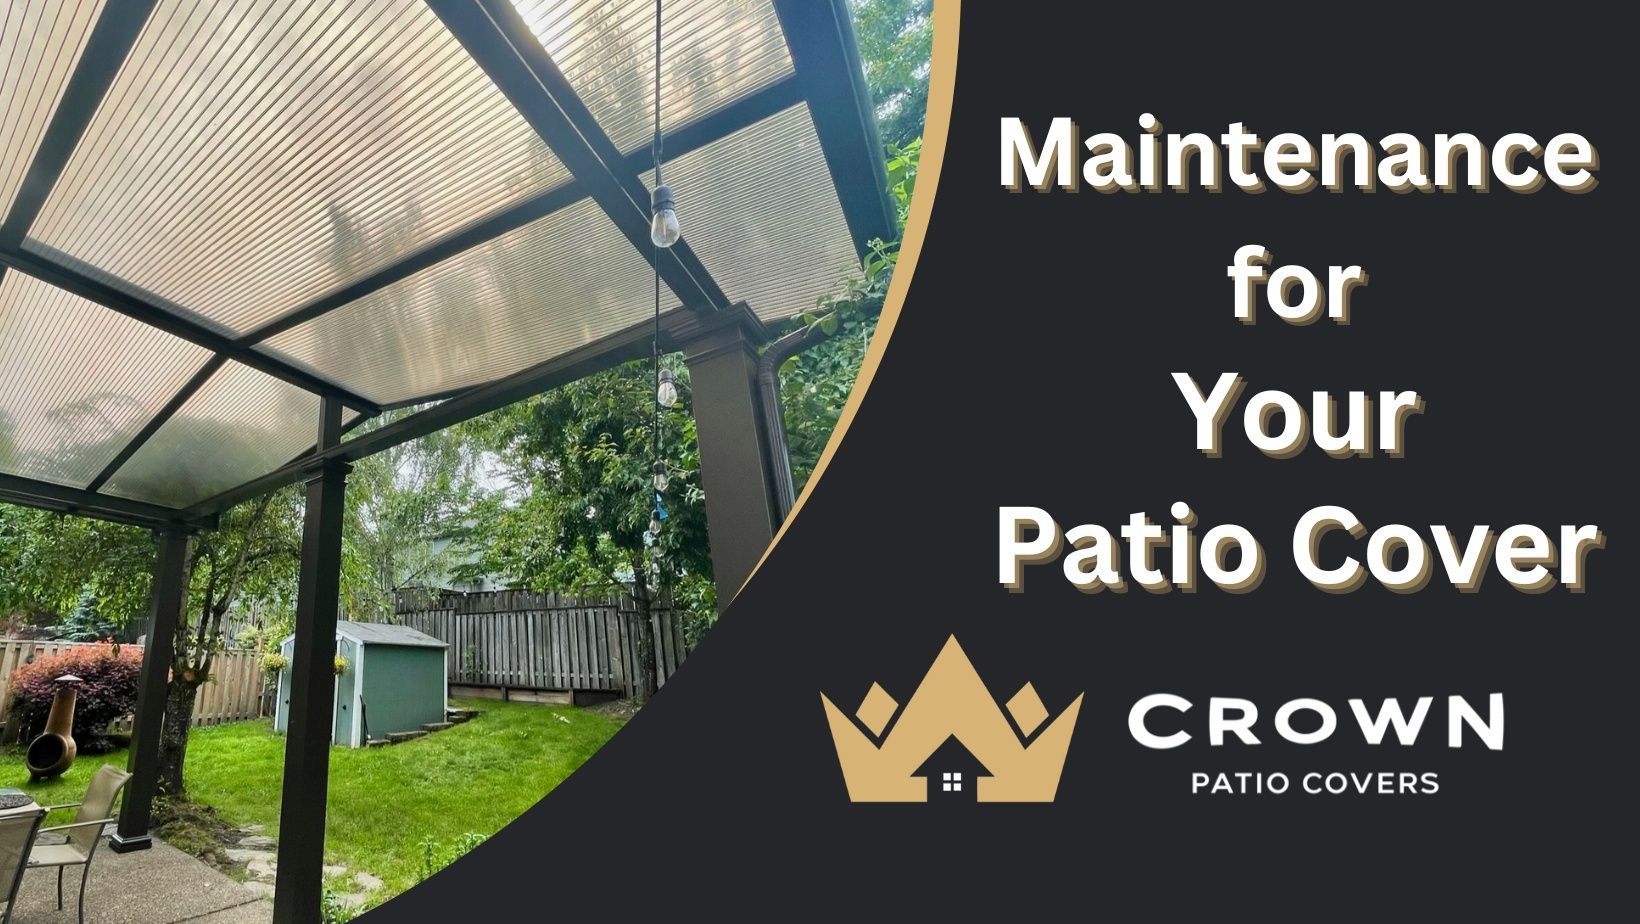 Patio Cover Blog in Portland, OR and the surrounding communities.